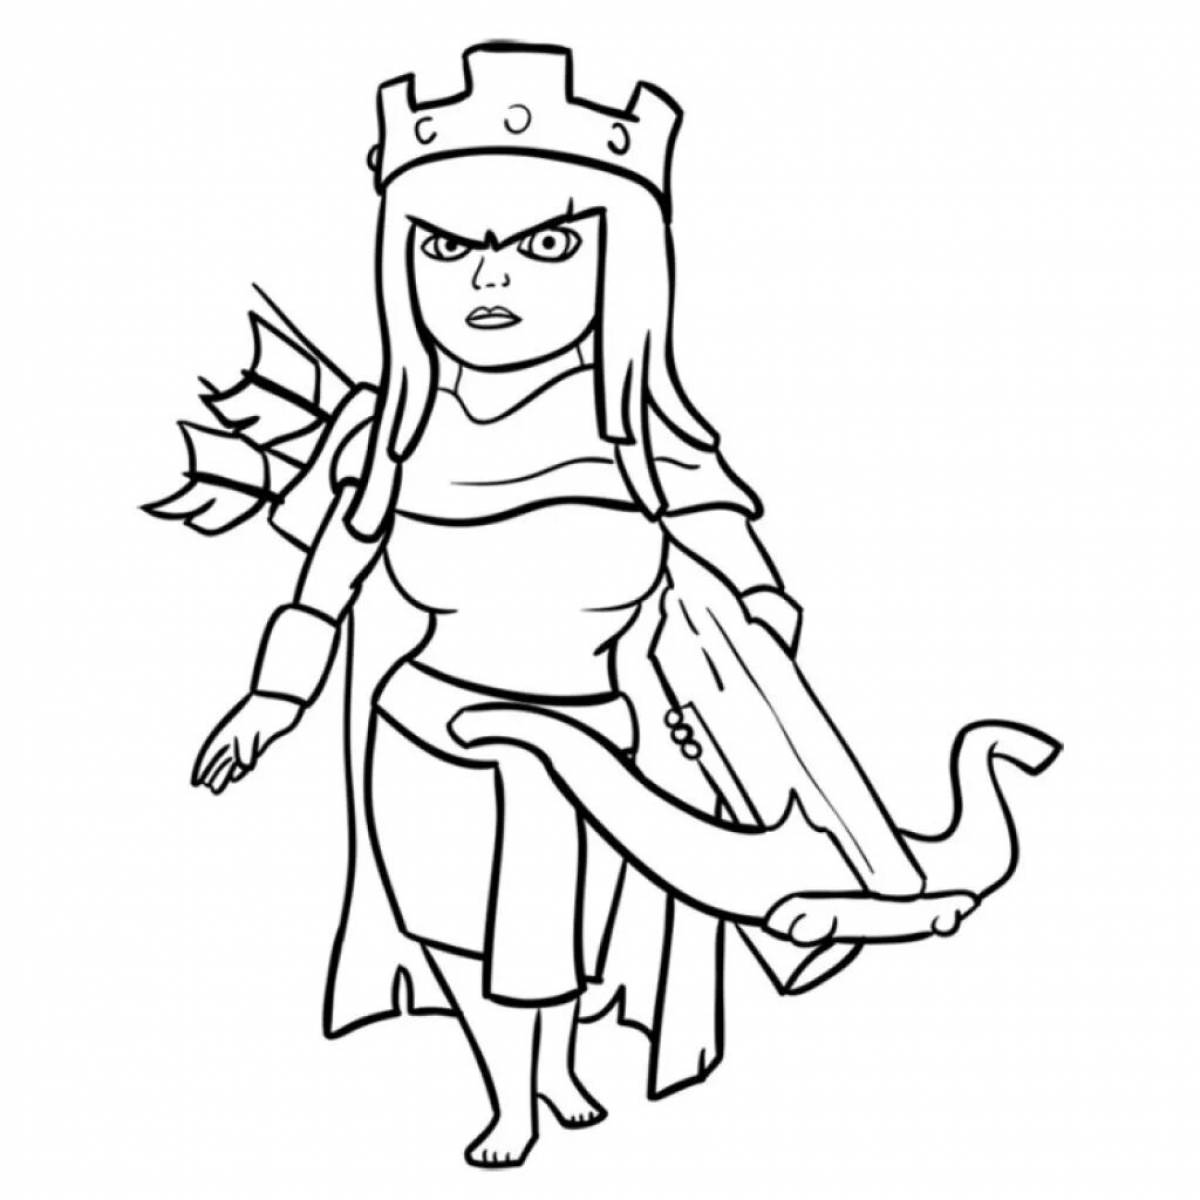 Peaceful clash royale arena coloring page